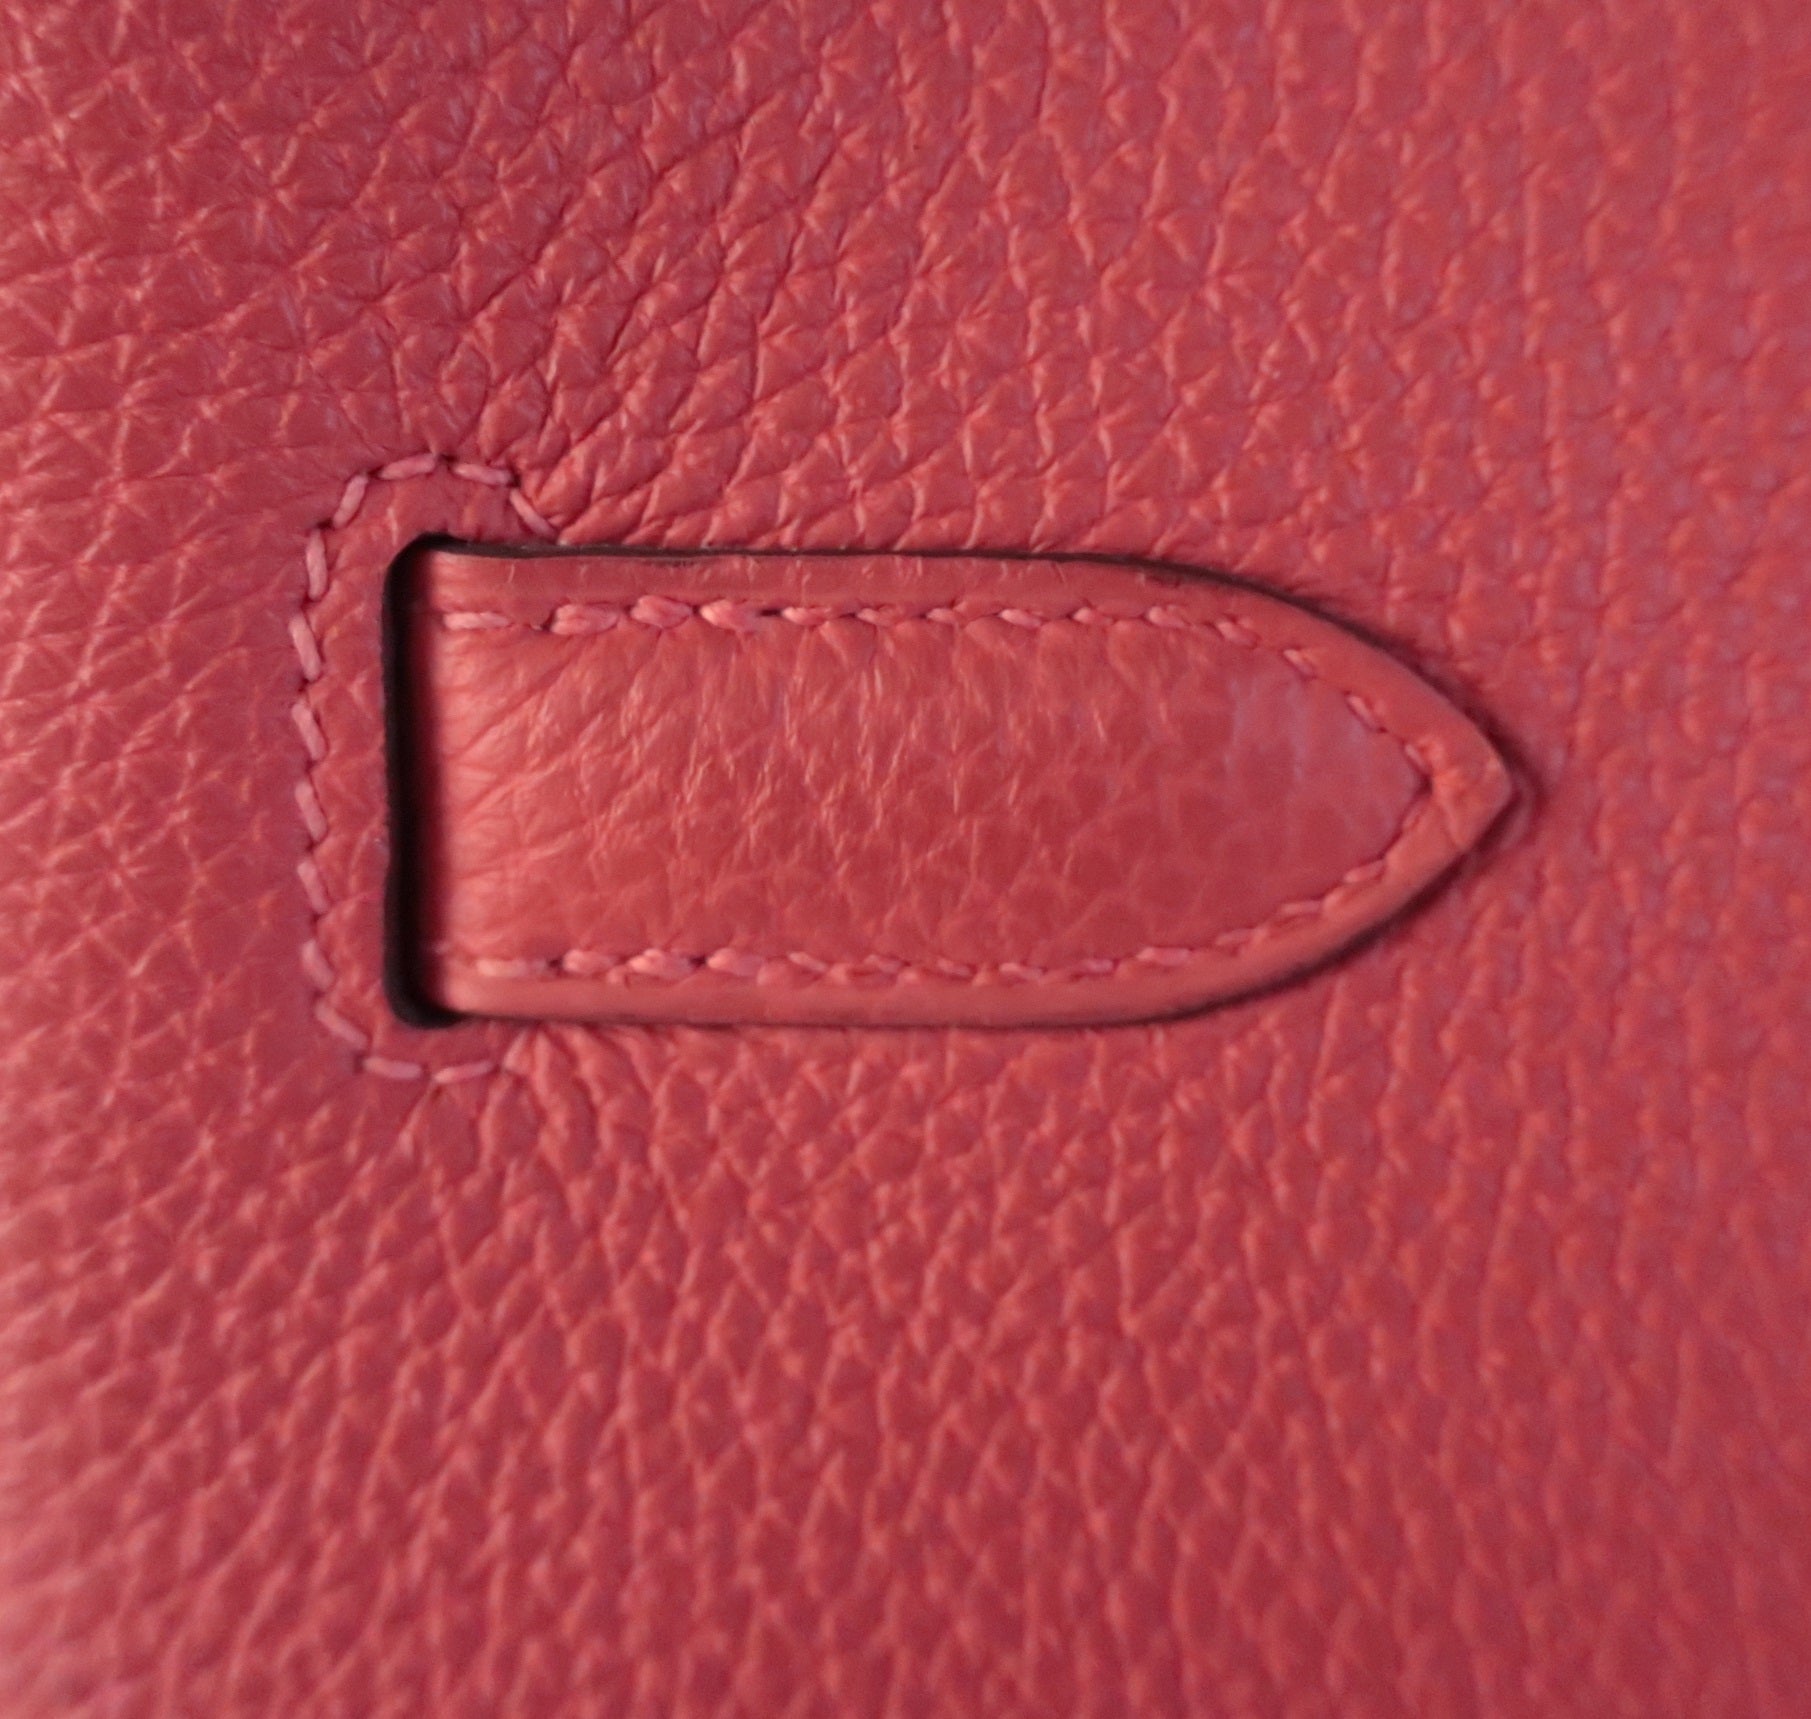 Ultimate Hermes Leathers Guide: What Are Hermes Bags Made Of? Hermes Togo Leather